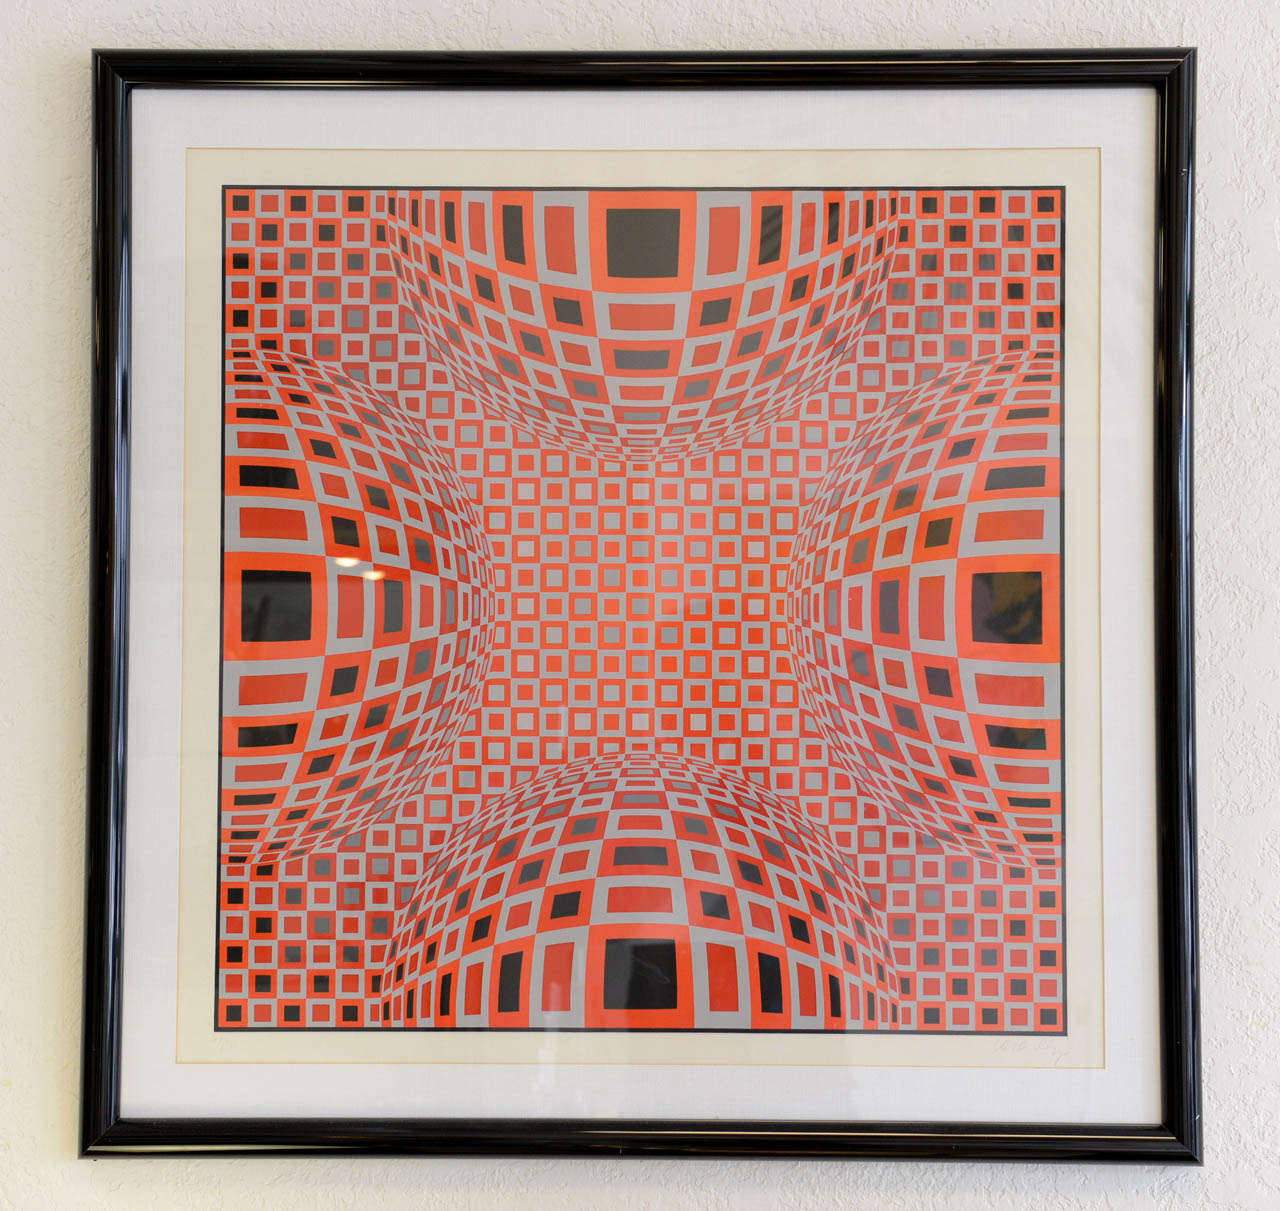 Color silkscreen by Victor Vasarely (1906 - 1997).  Pencil signed and numbered 29/125.  Framed measurements listed below.

Please feel free to contact us directly for a shipping quote or any additional information by clicking 